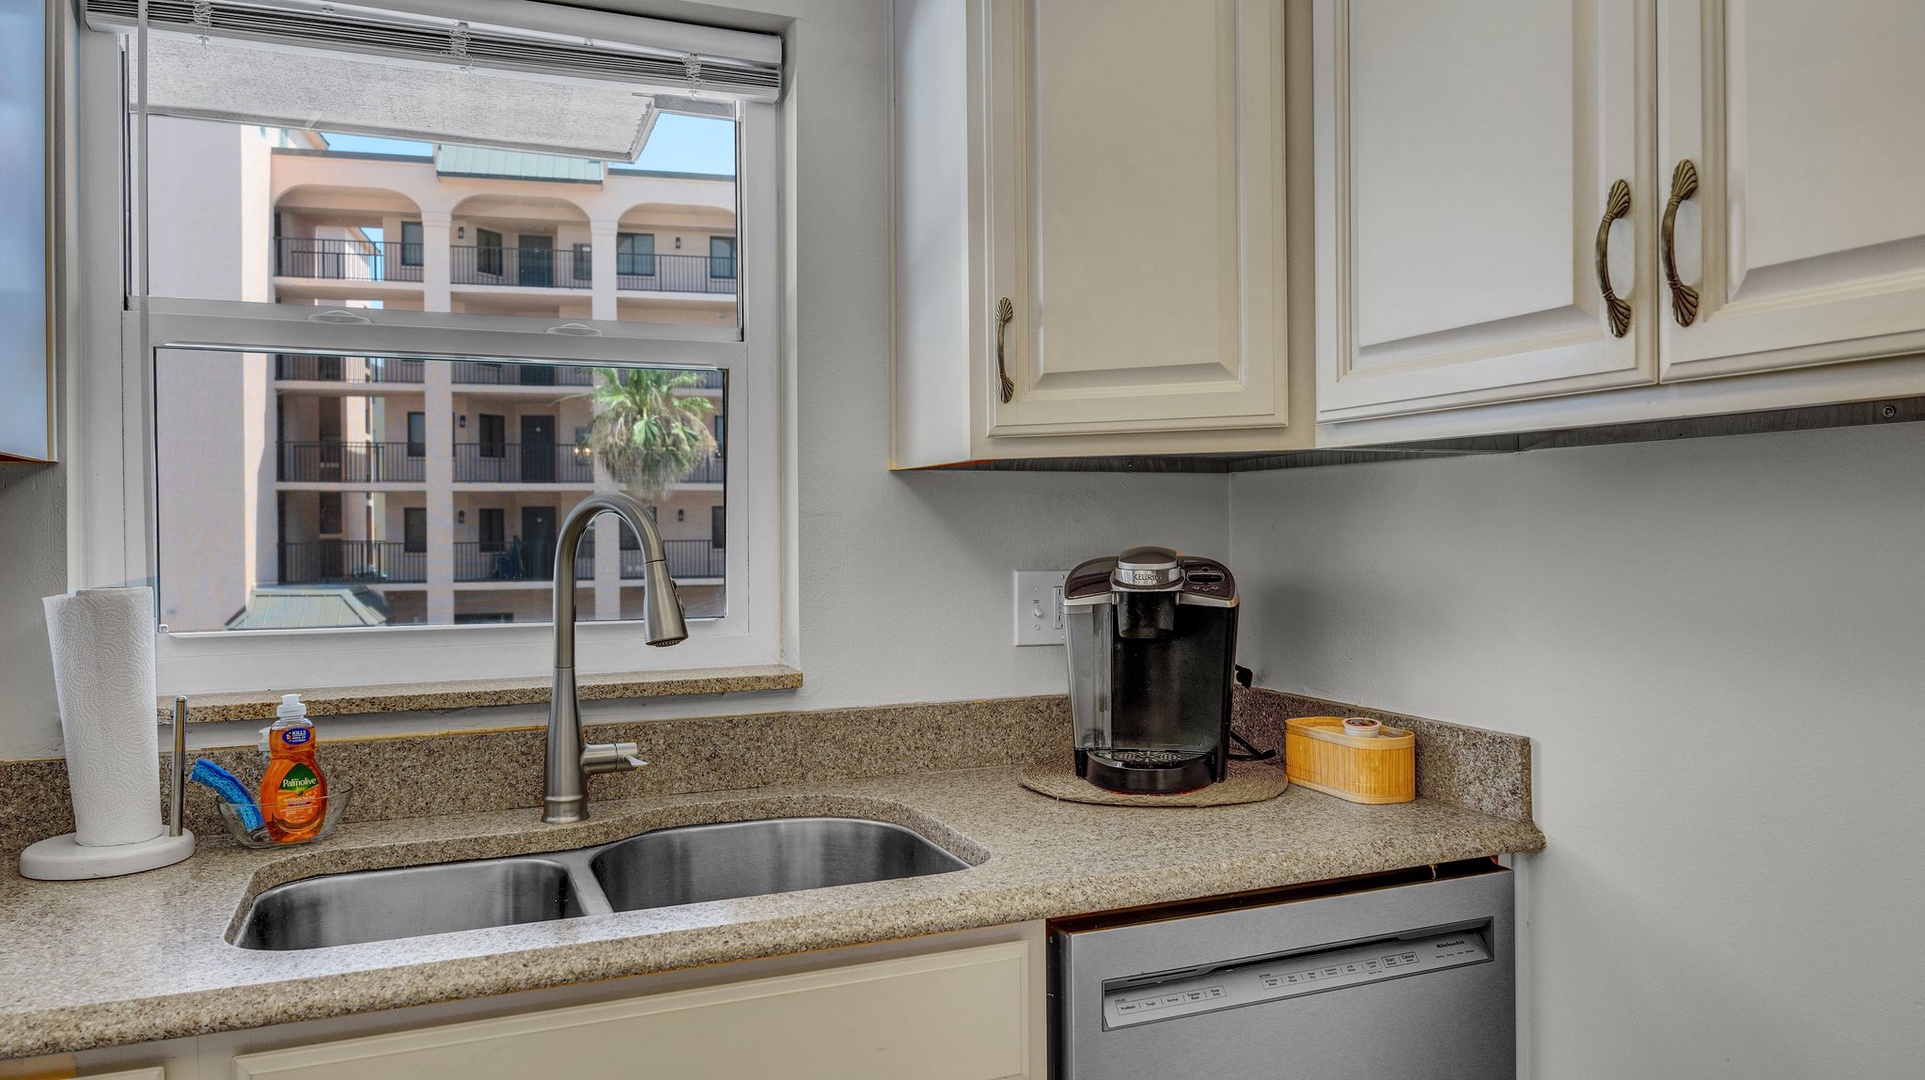 The well-equipped kitchen offers ample storage space & fantastic amenities